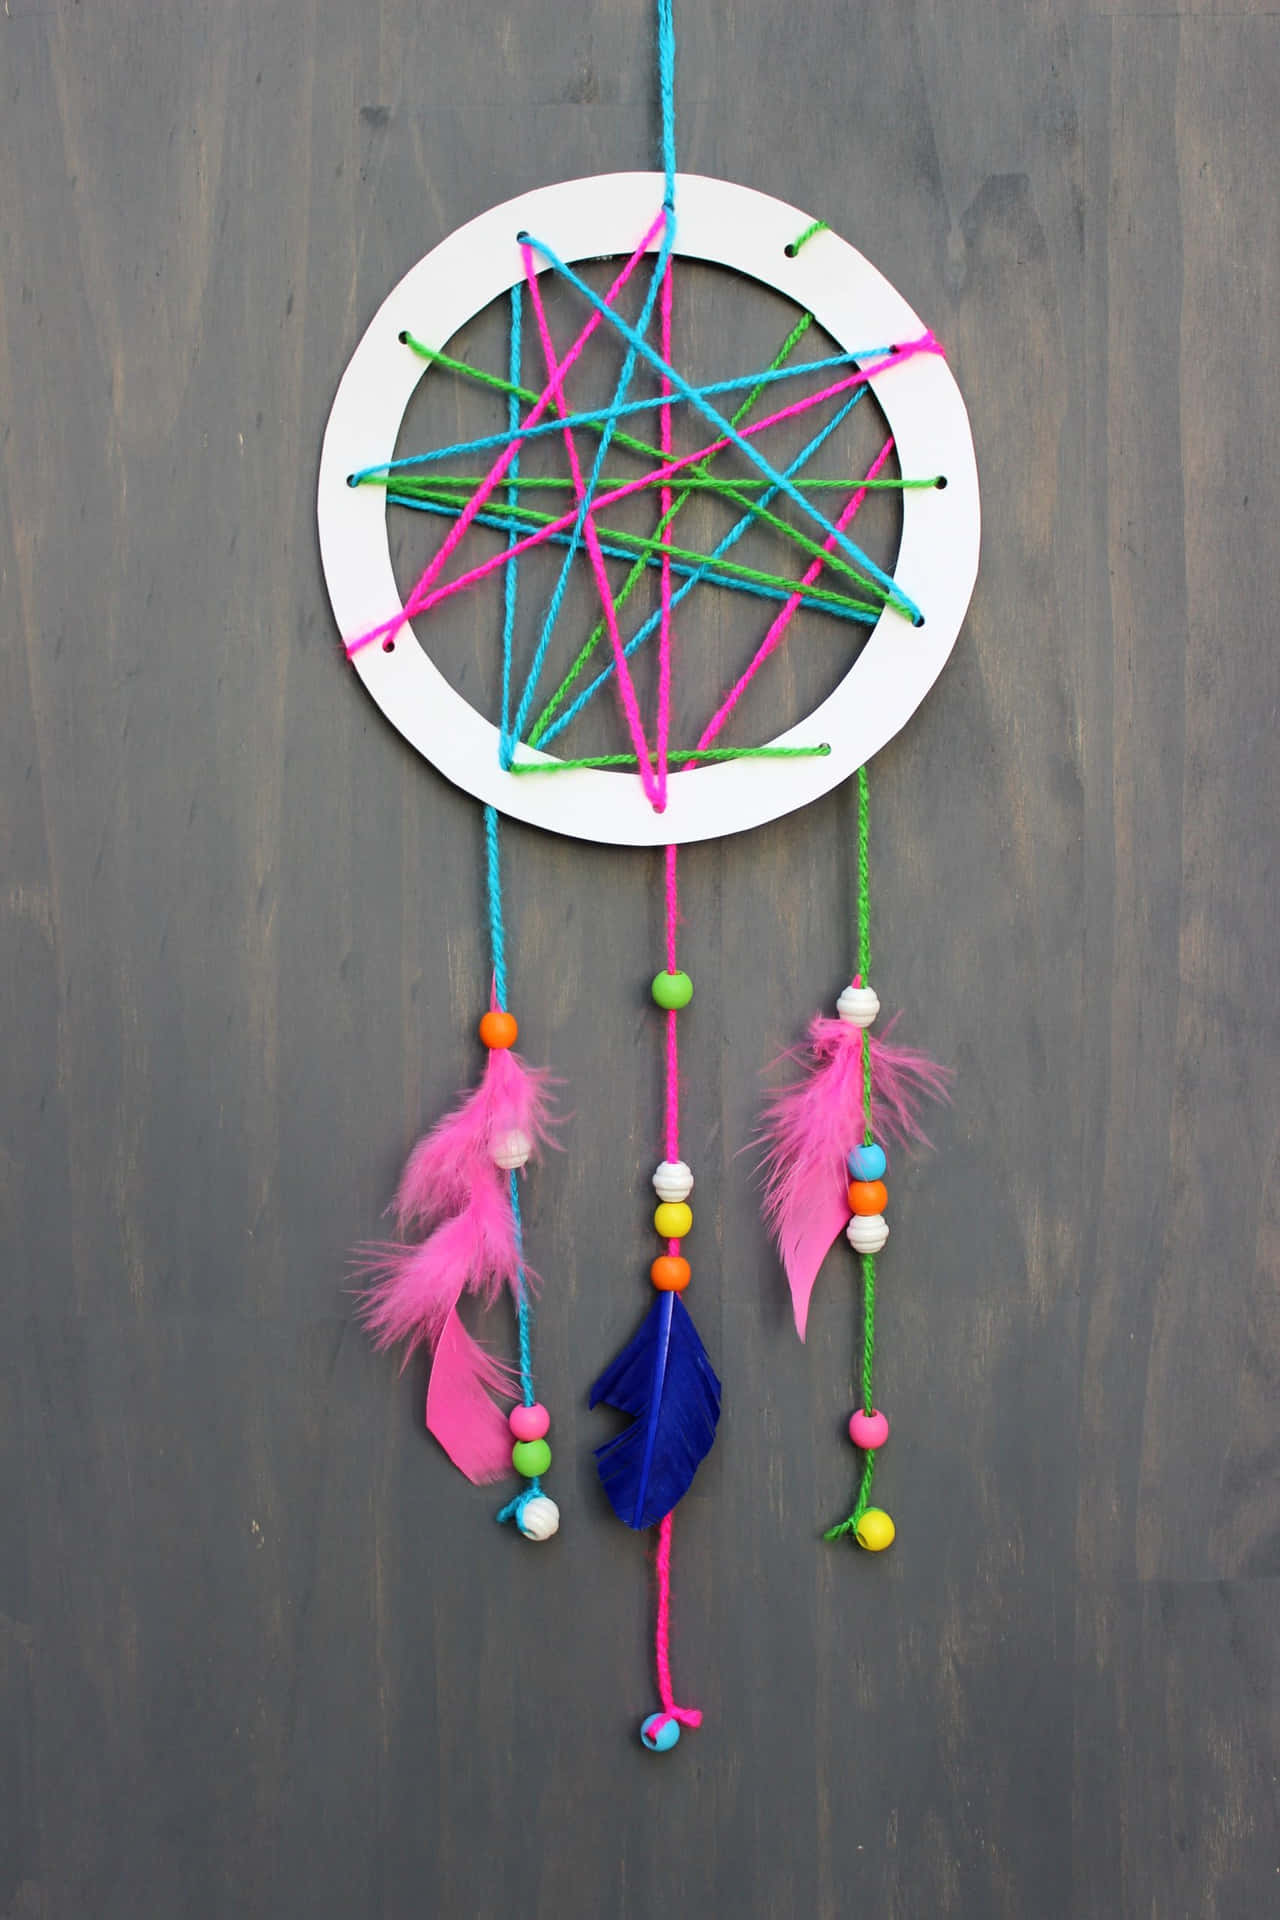 A Colorful Dream Catcher Hanging On A Wall